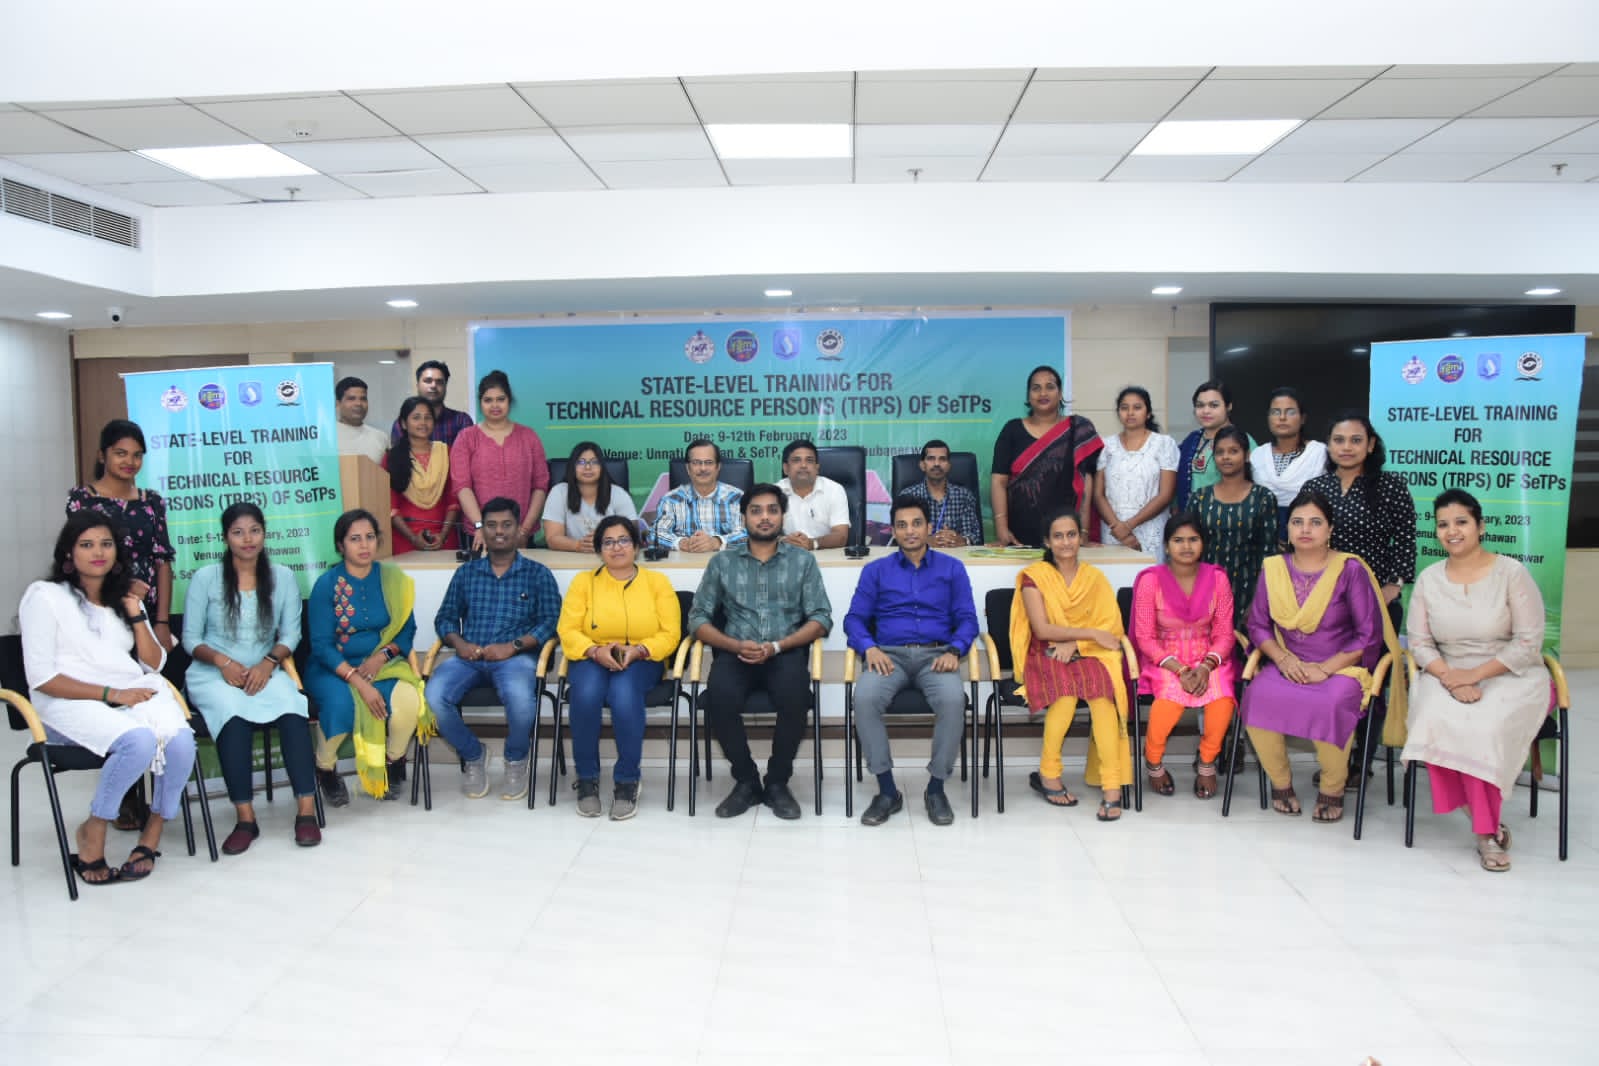 Odisha Water Supply & Sewerage Board (OWSSB) and Odisha Water Academy (OWA) in partnership with WASH Institute and Ernst & Young (EY) ) conducted a TRP (Technical Resource Person) Training-Lab Technicians from SeTP (Sewerage Treatment Plant) in Bhubaneswar, Odisha.